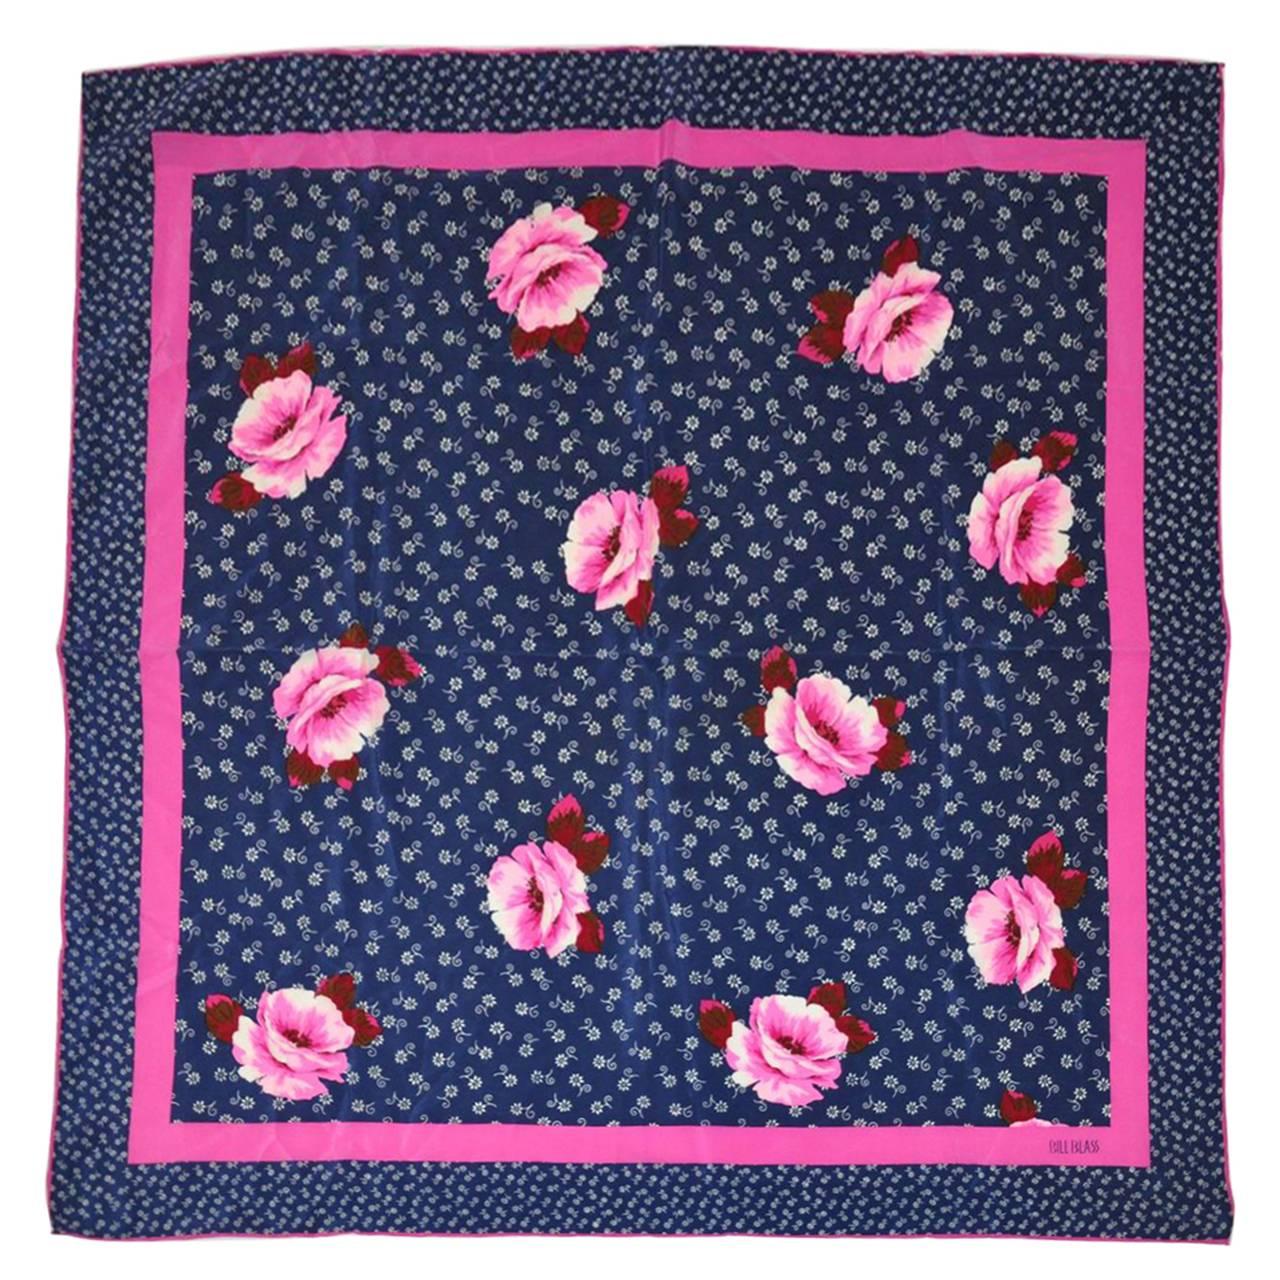 Bill Blass Fuchsia, Navy and White Floral Silk Scarf with Hand-Rolled Edges